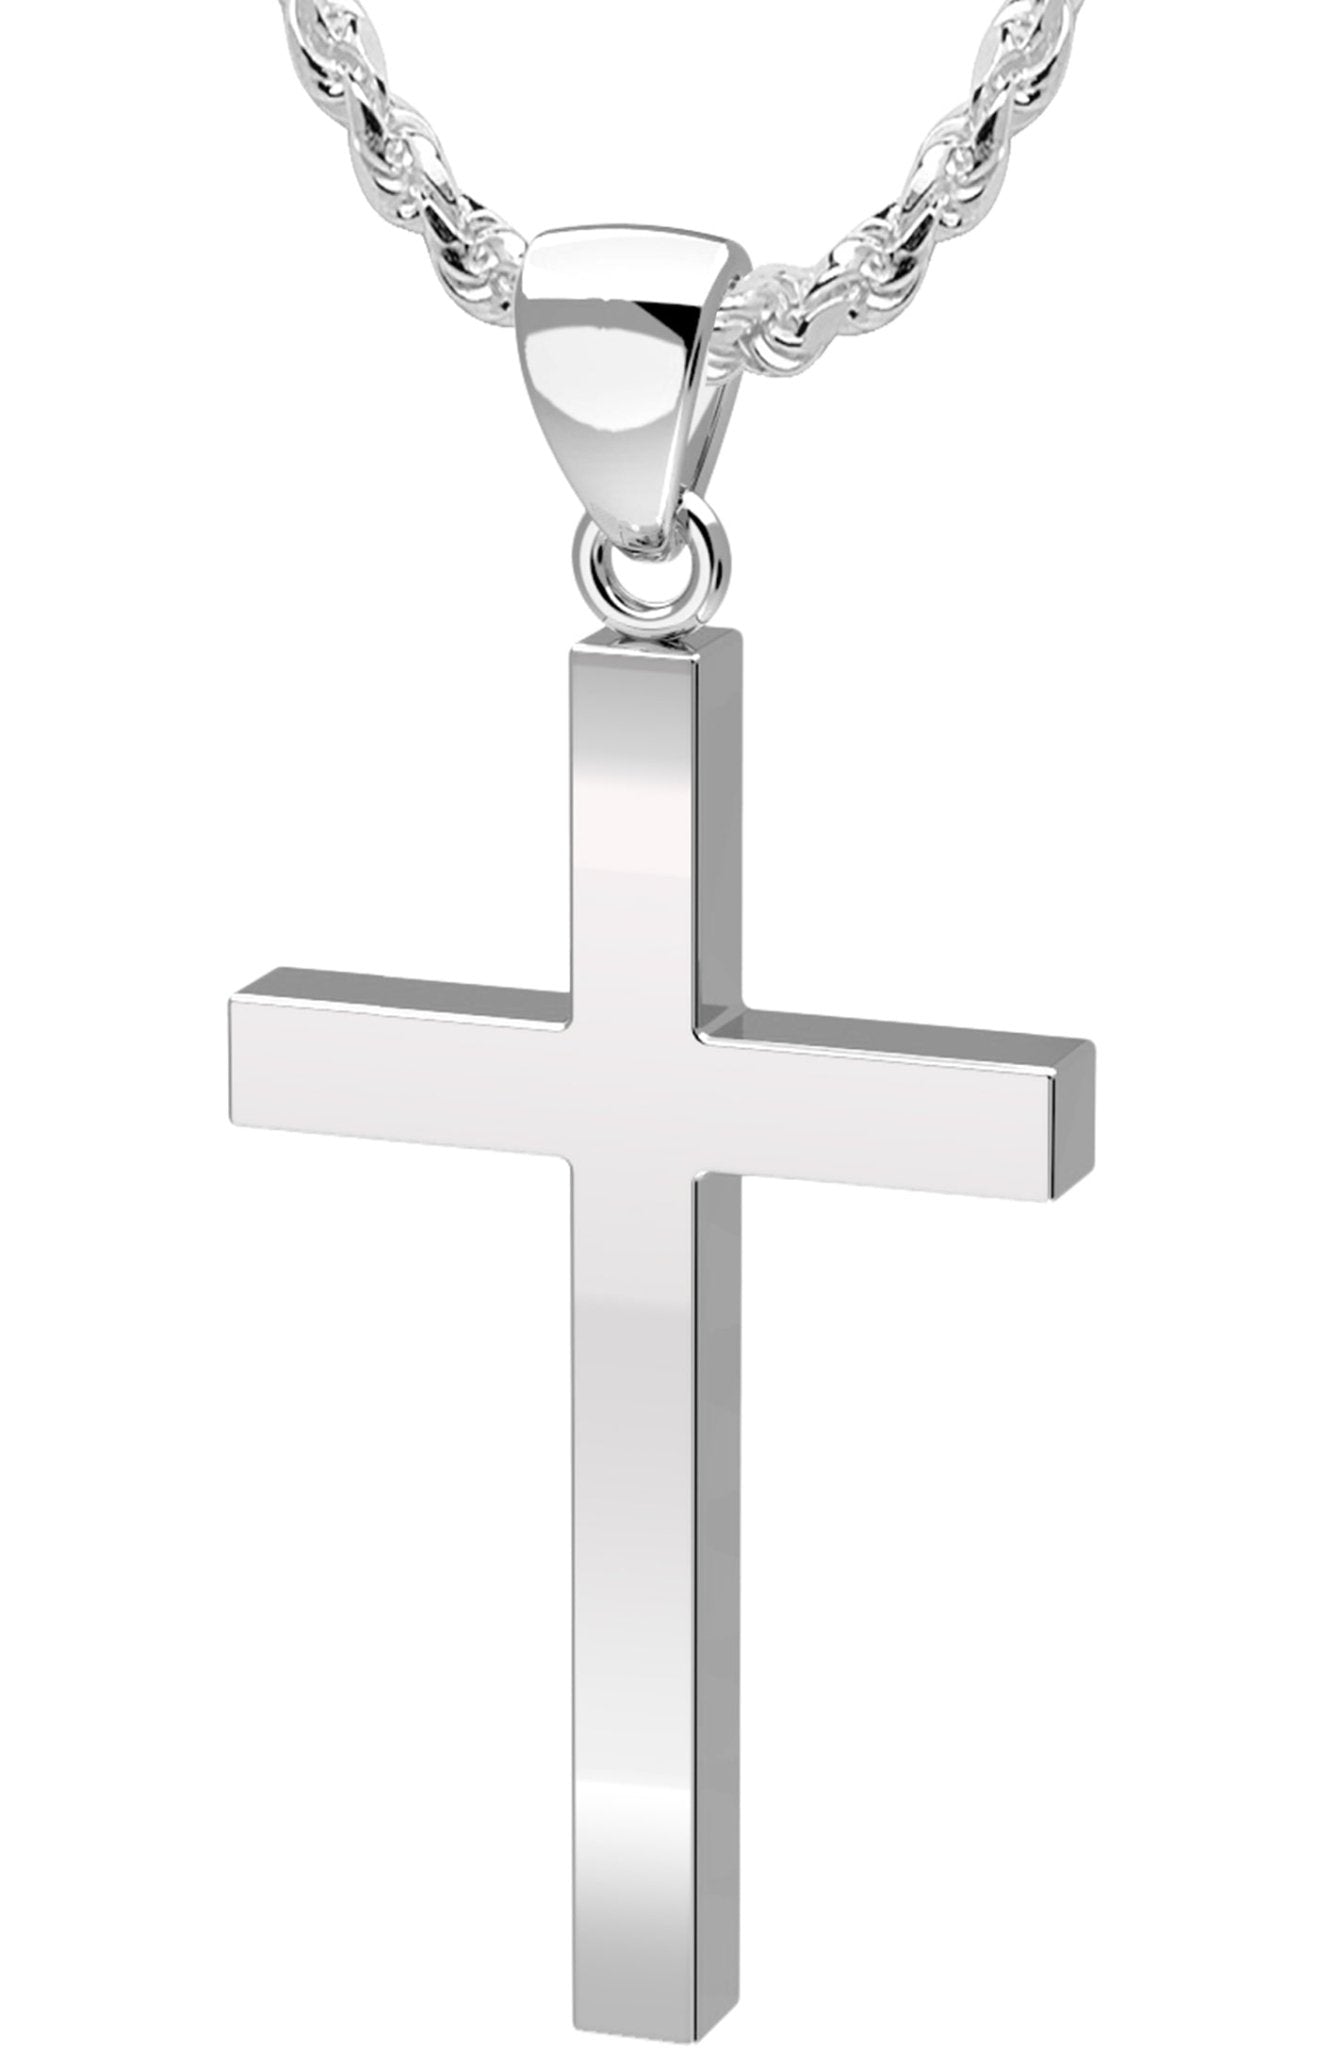 Cross Pendant Necklace - Pendant Necklace Made for Men 22in 4.3mm Rope Chain